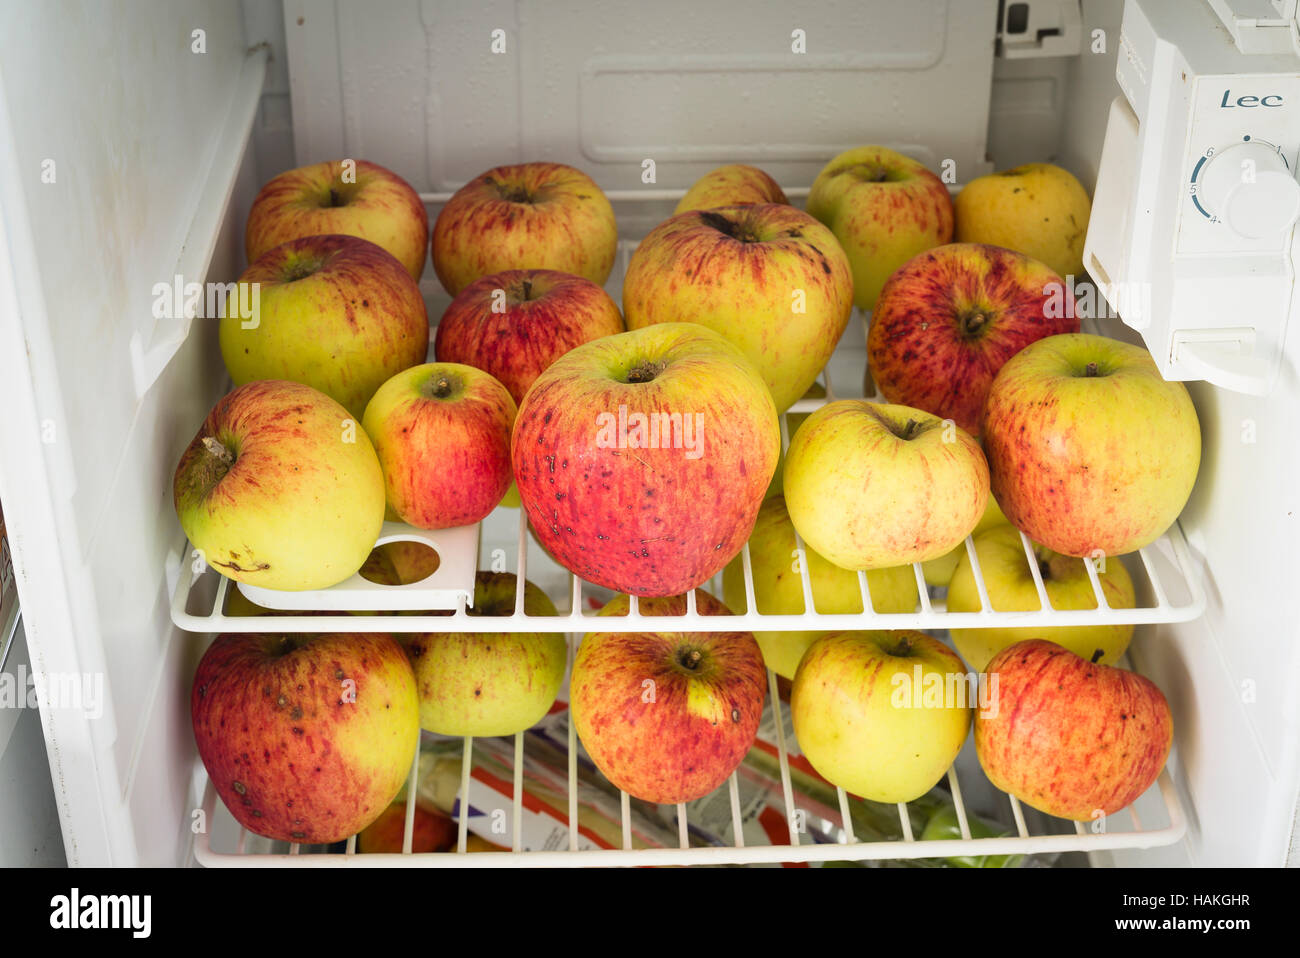 Ripe harvested apples being stored in a refrigerator for winter consumption Stock Photo